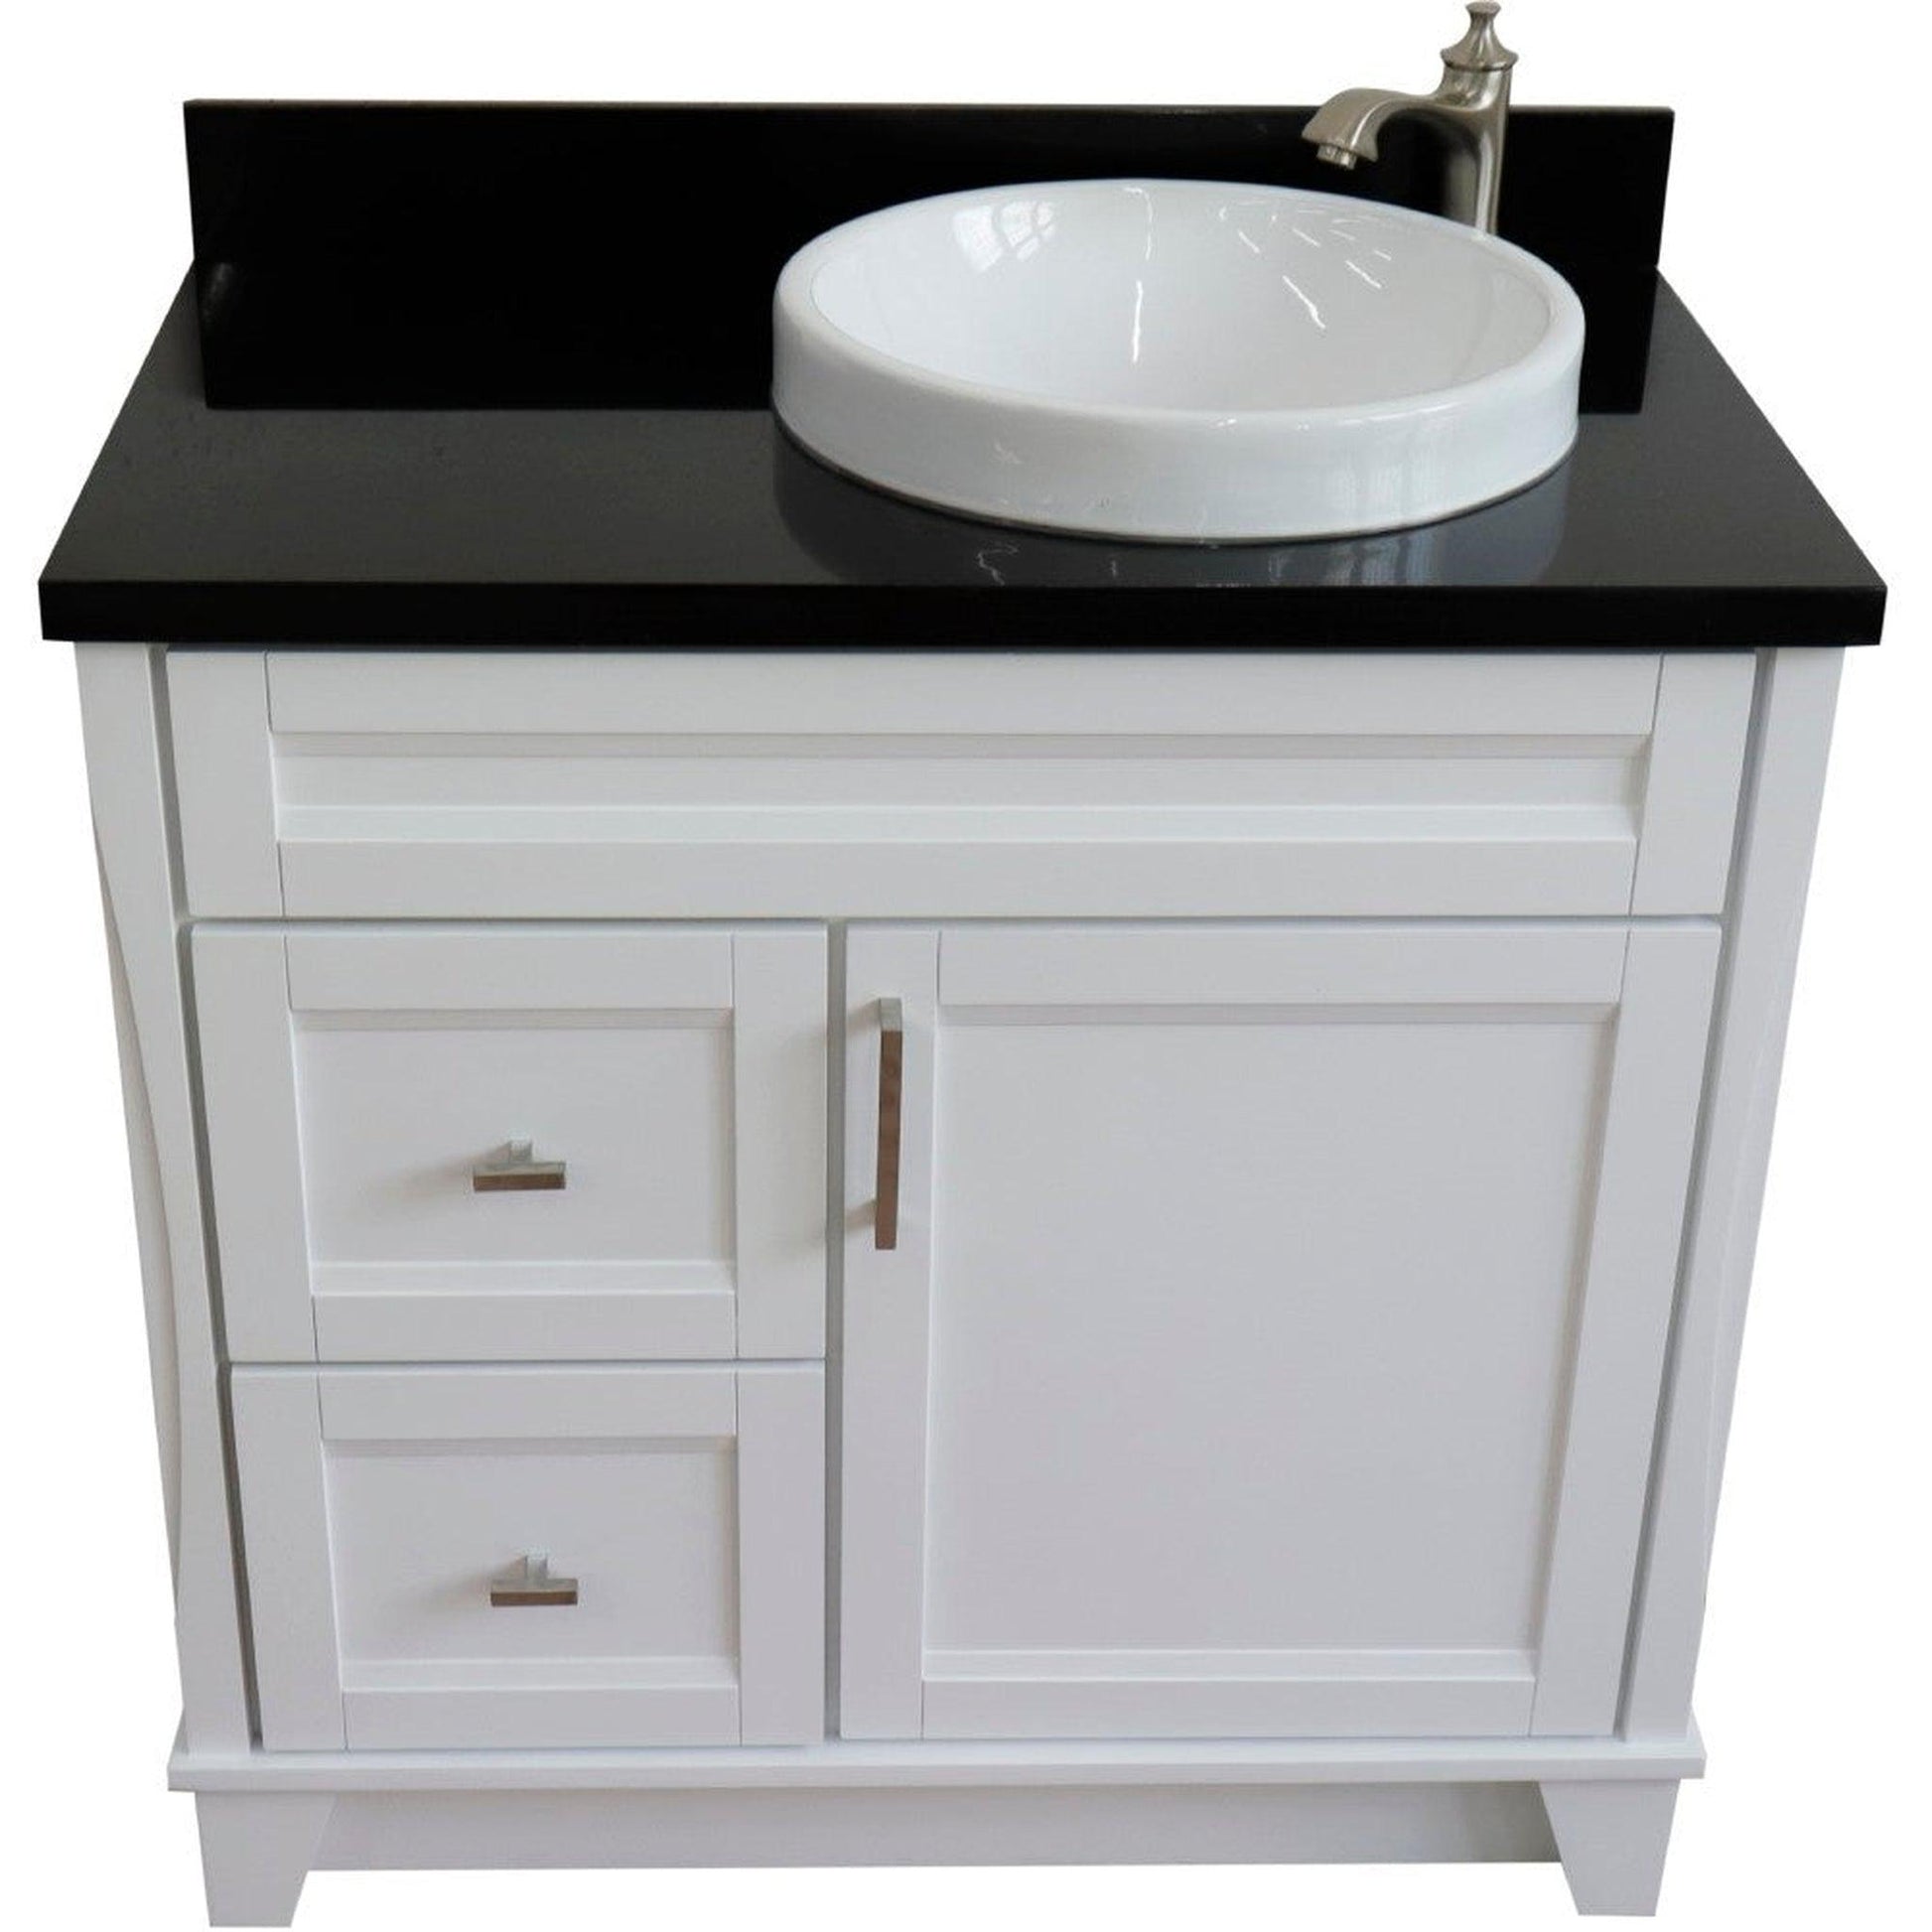 Bellaterra Home Terni 37" 1-Door 2-Drawer White Freestanding Vanity Set With Ceramic Right Offset Vessel Sink and Black Galaxy Granite Top, and Right Door Base